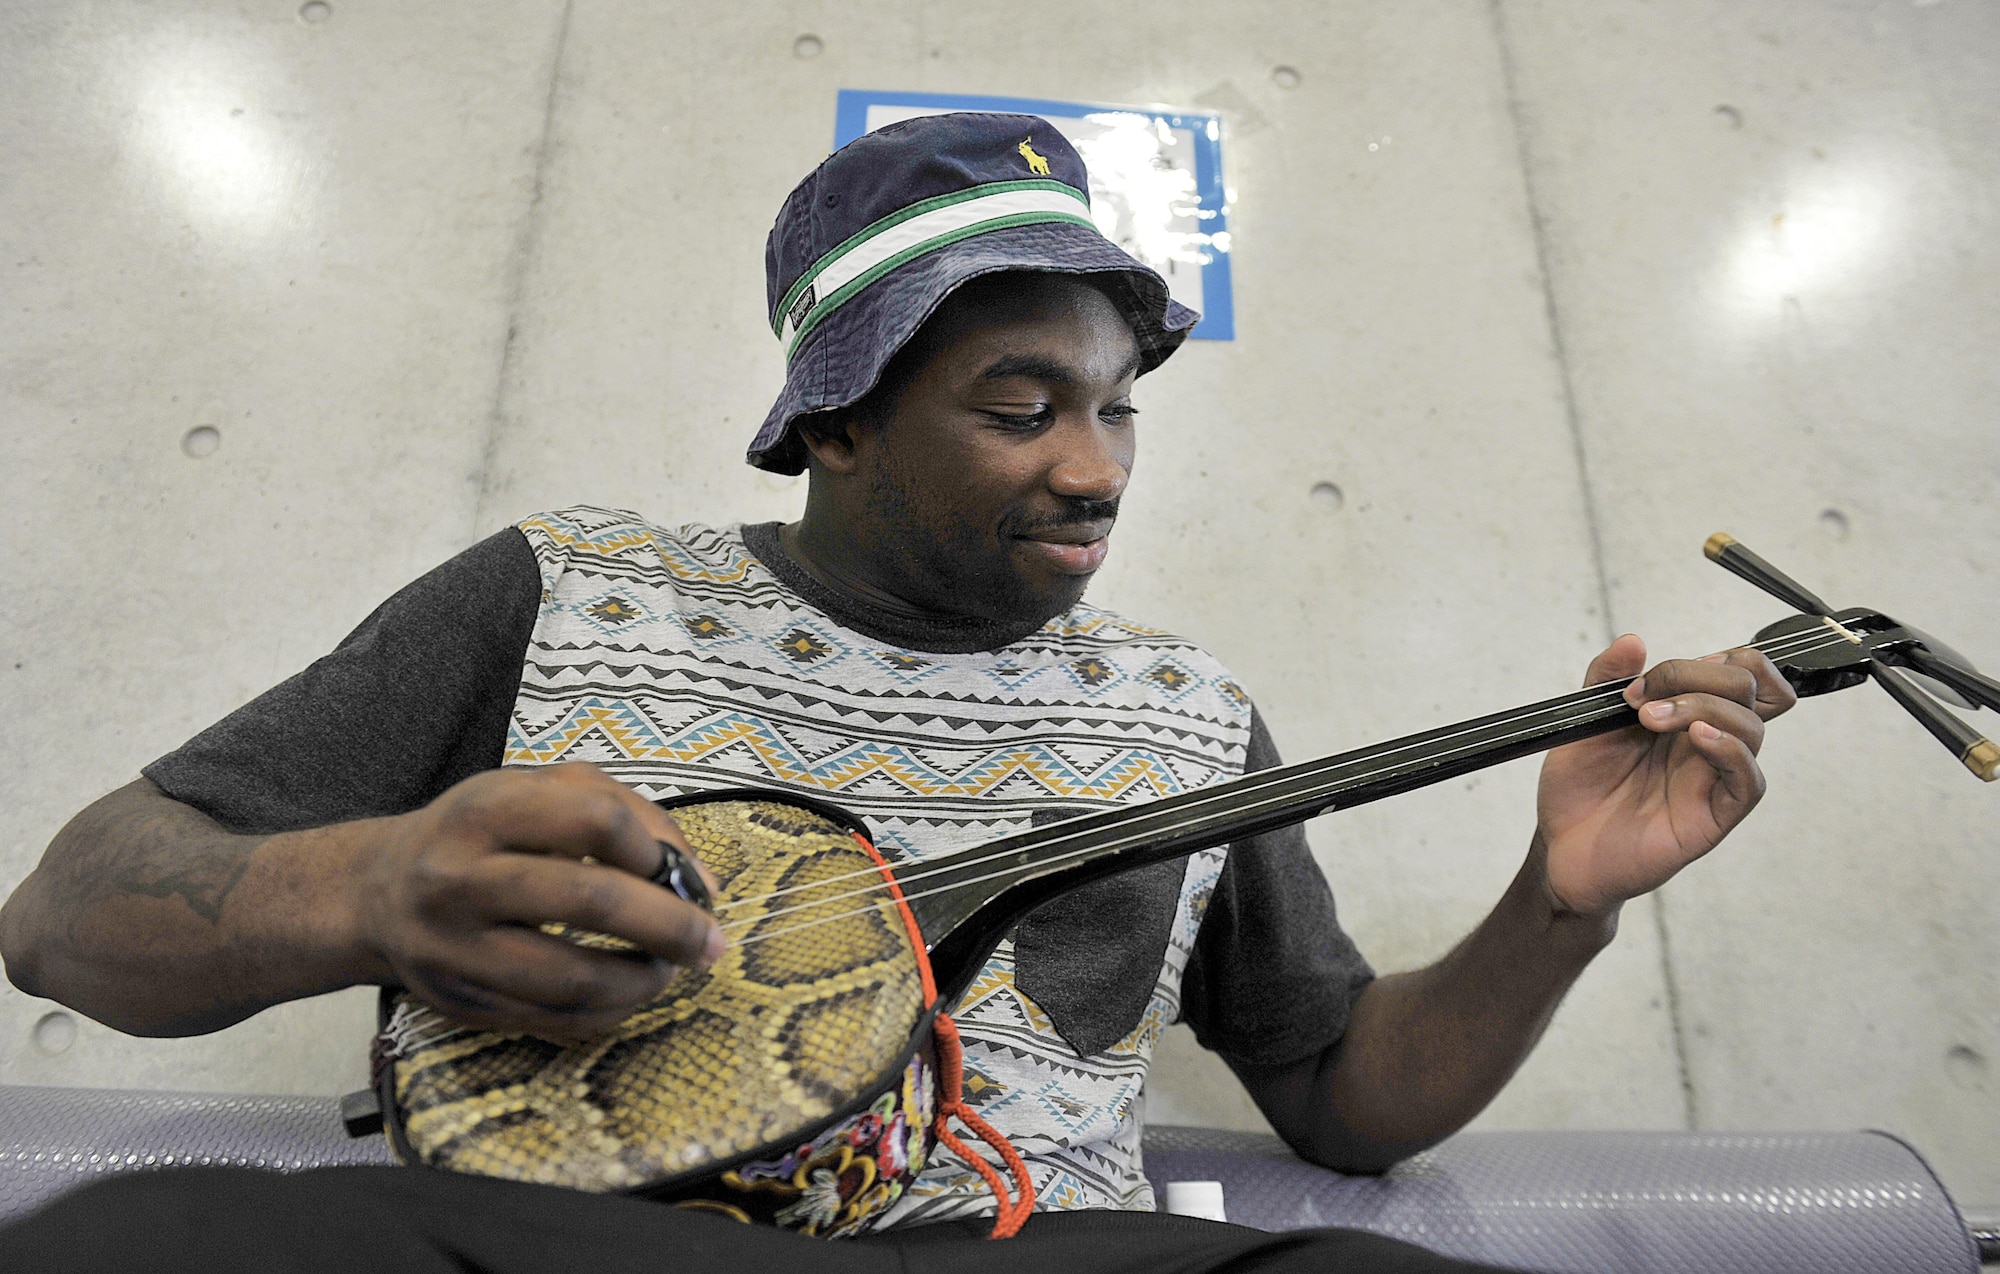 U.S. Air Force Senior Airman Kevin Inniss, 18th Communications Squadron knowledge manager, plays a Sanshin (Okinawa traditional guitar) during a culture exchange program at Kadena Rotary Plaza, Japan, Aug. 14, 2015. During the program, U.S. Air Force volunteers from the 18th Wing and Kadena Language Institute students exchanged their culture and language to improve ties between the U.S. Air Force and local community on Okinawa. (U.S. Air Force photo by Naoto Anazawa/Released)